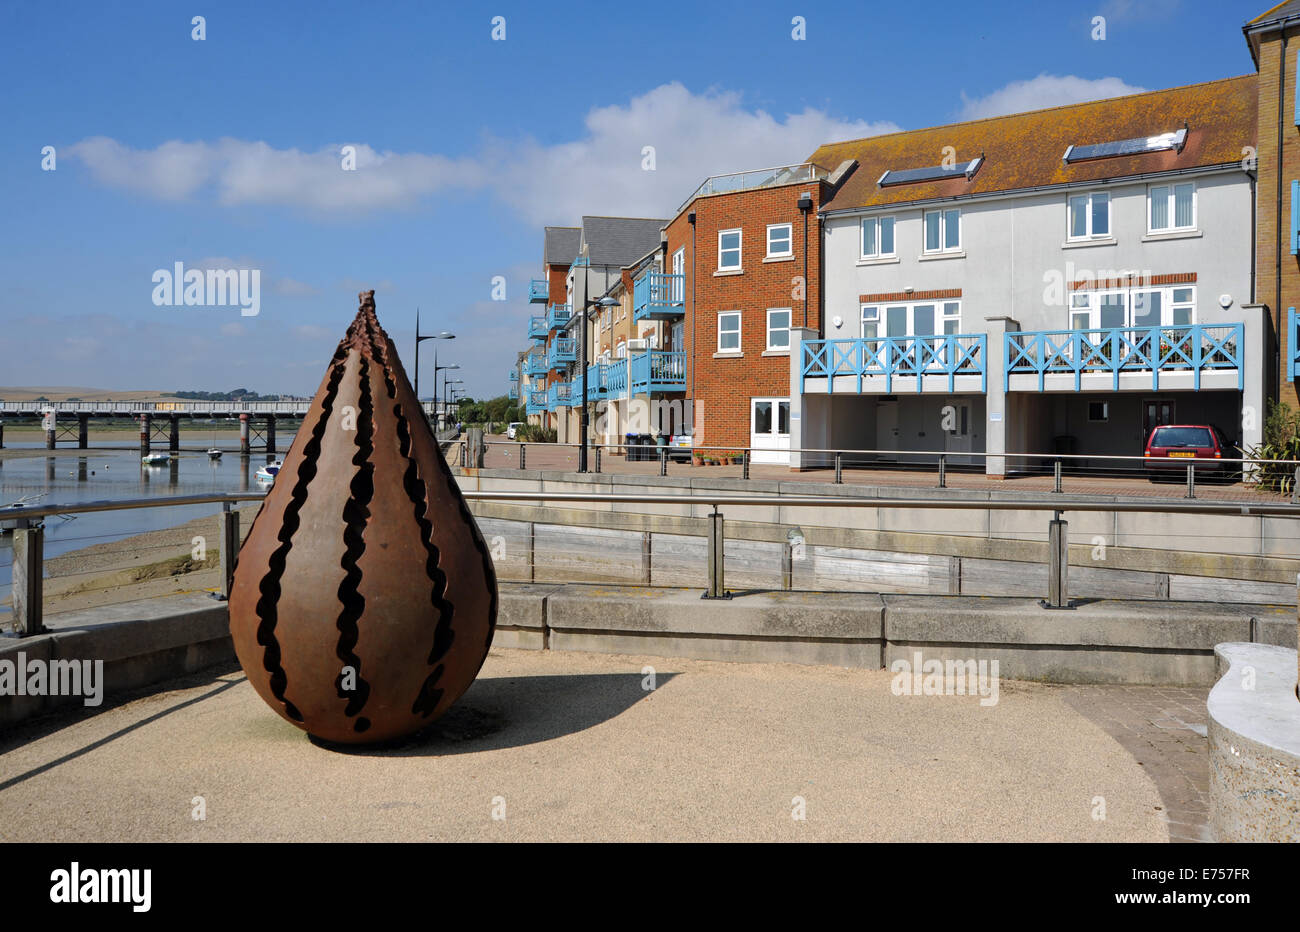 Shoreham  Sussex UK The Ropetackle development of exclusive flats and houses on the banks of the River Adur Shoreham Photograph Stock Photo